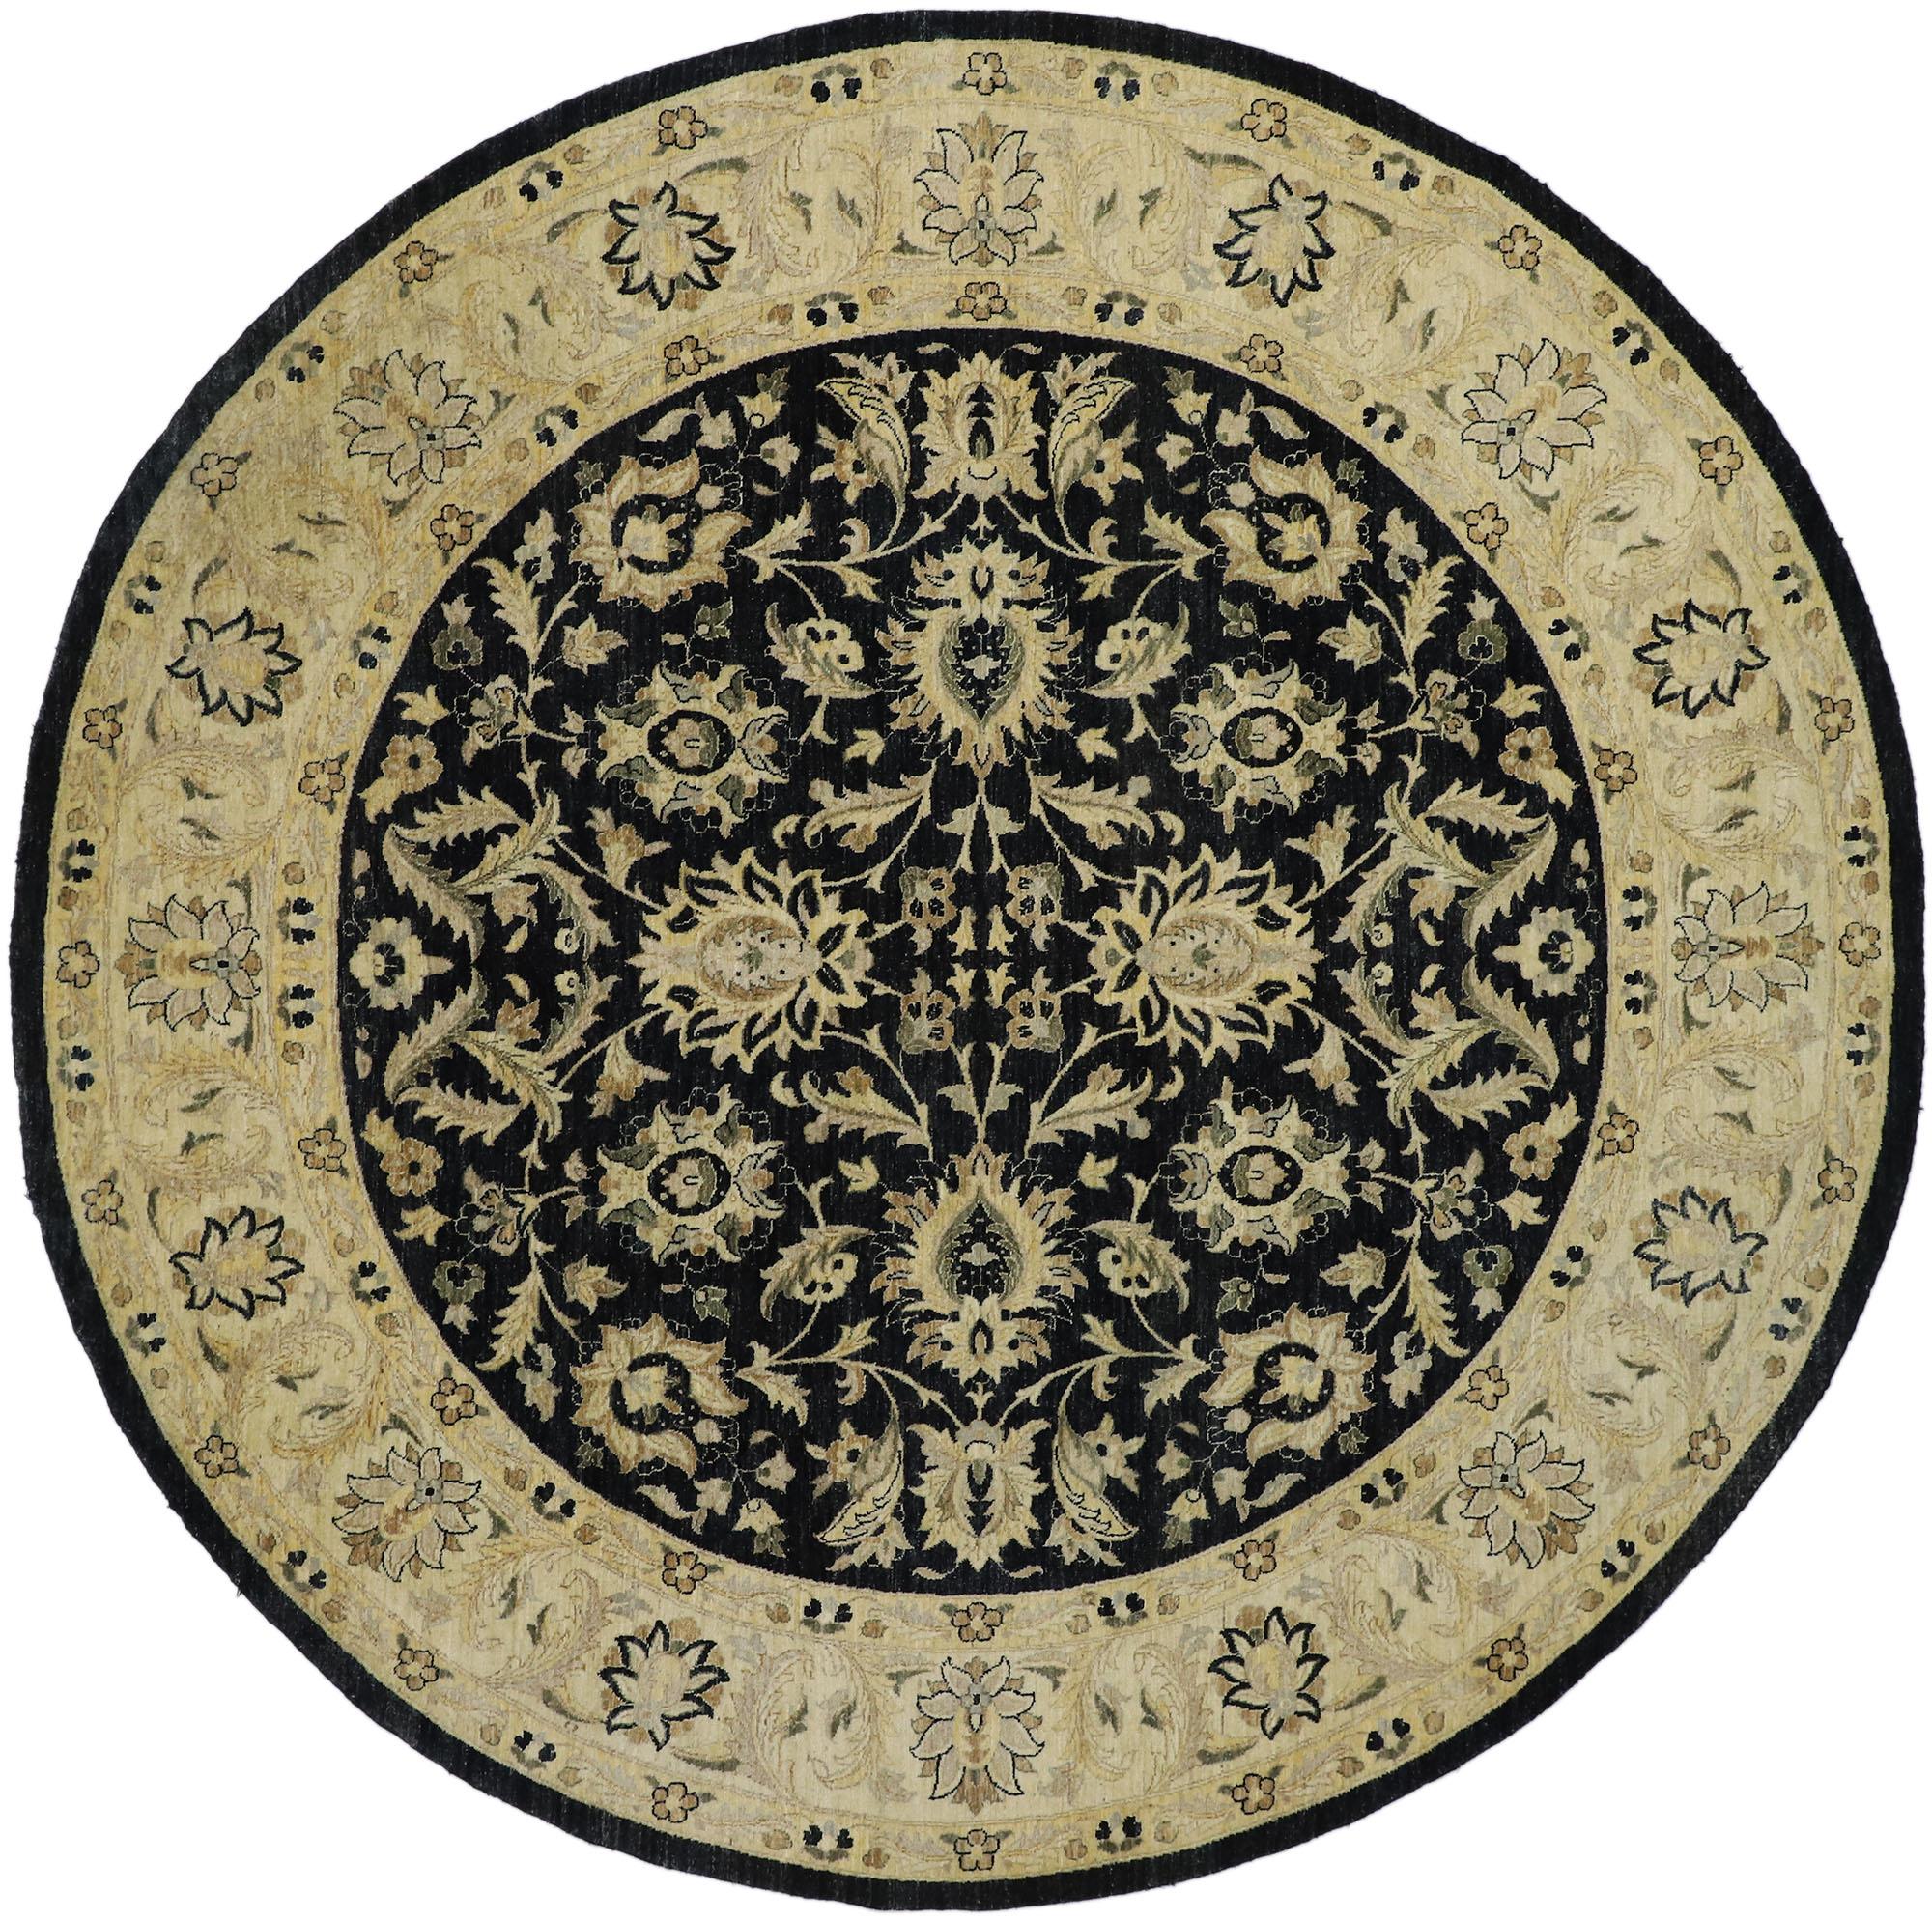 Wool Vintage Indian Round Area Rug, Circular Rug with Modern Amish Style For Sale